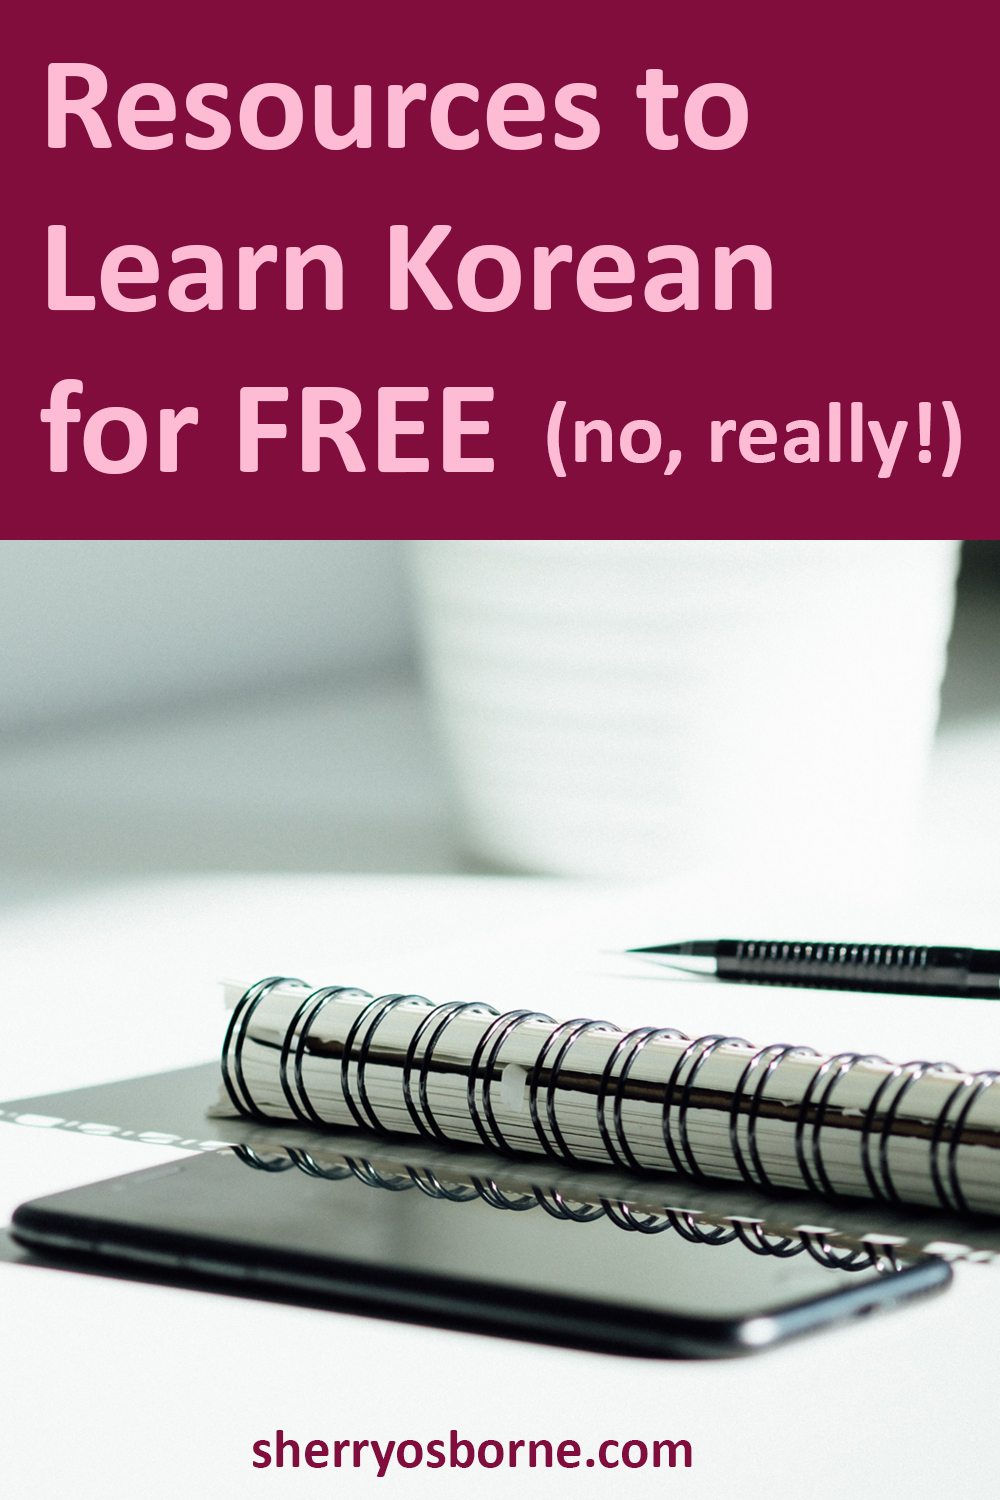 How to learn Korean for free